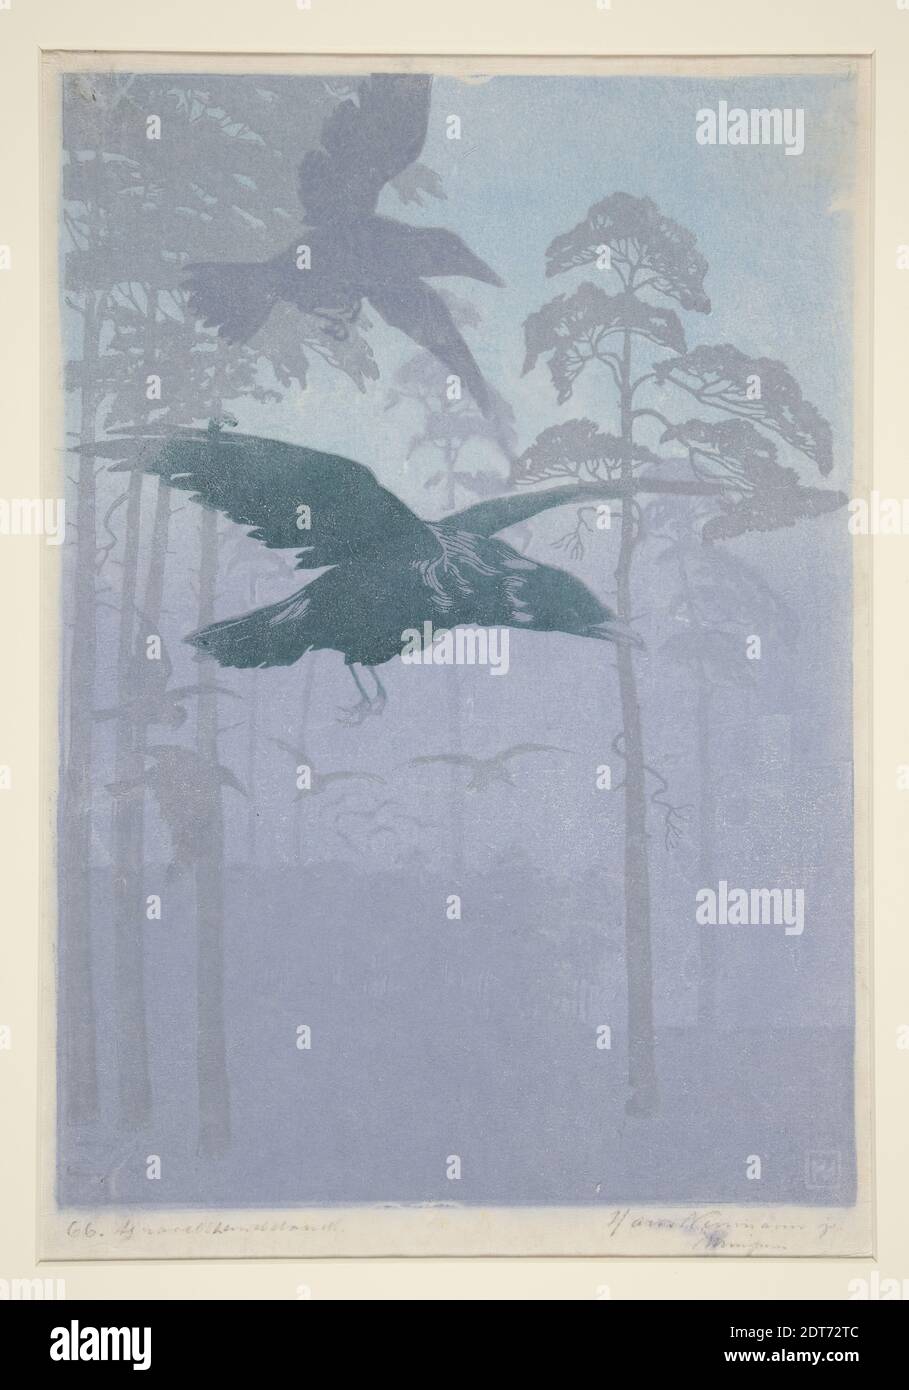 Artist: Hans Neumann, German, 1873–1957, Untitled (study of birds in forest), Color woodcut on Japan paper, Sheet: 37.2 × 25 cm (14 5/8 × 9 13/16 in.), Made in Germany, German, 19th century, Works on Paper - Prints Stock Photo